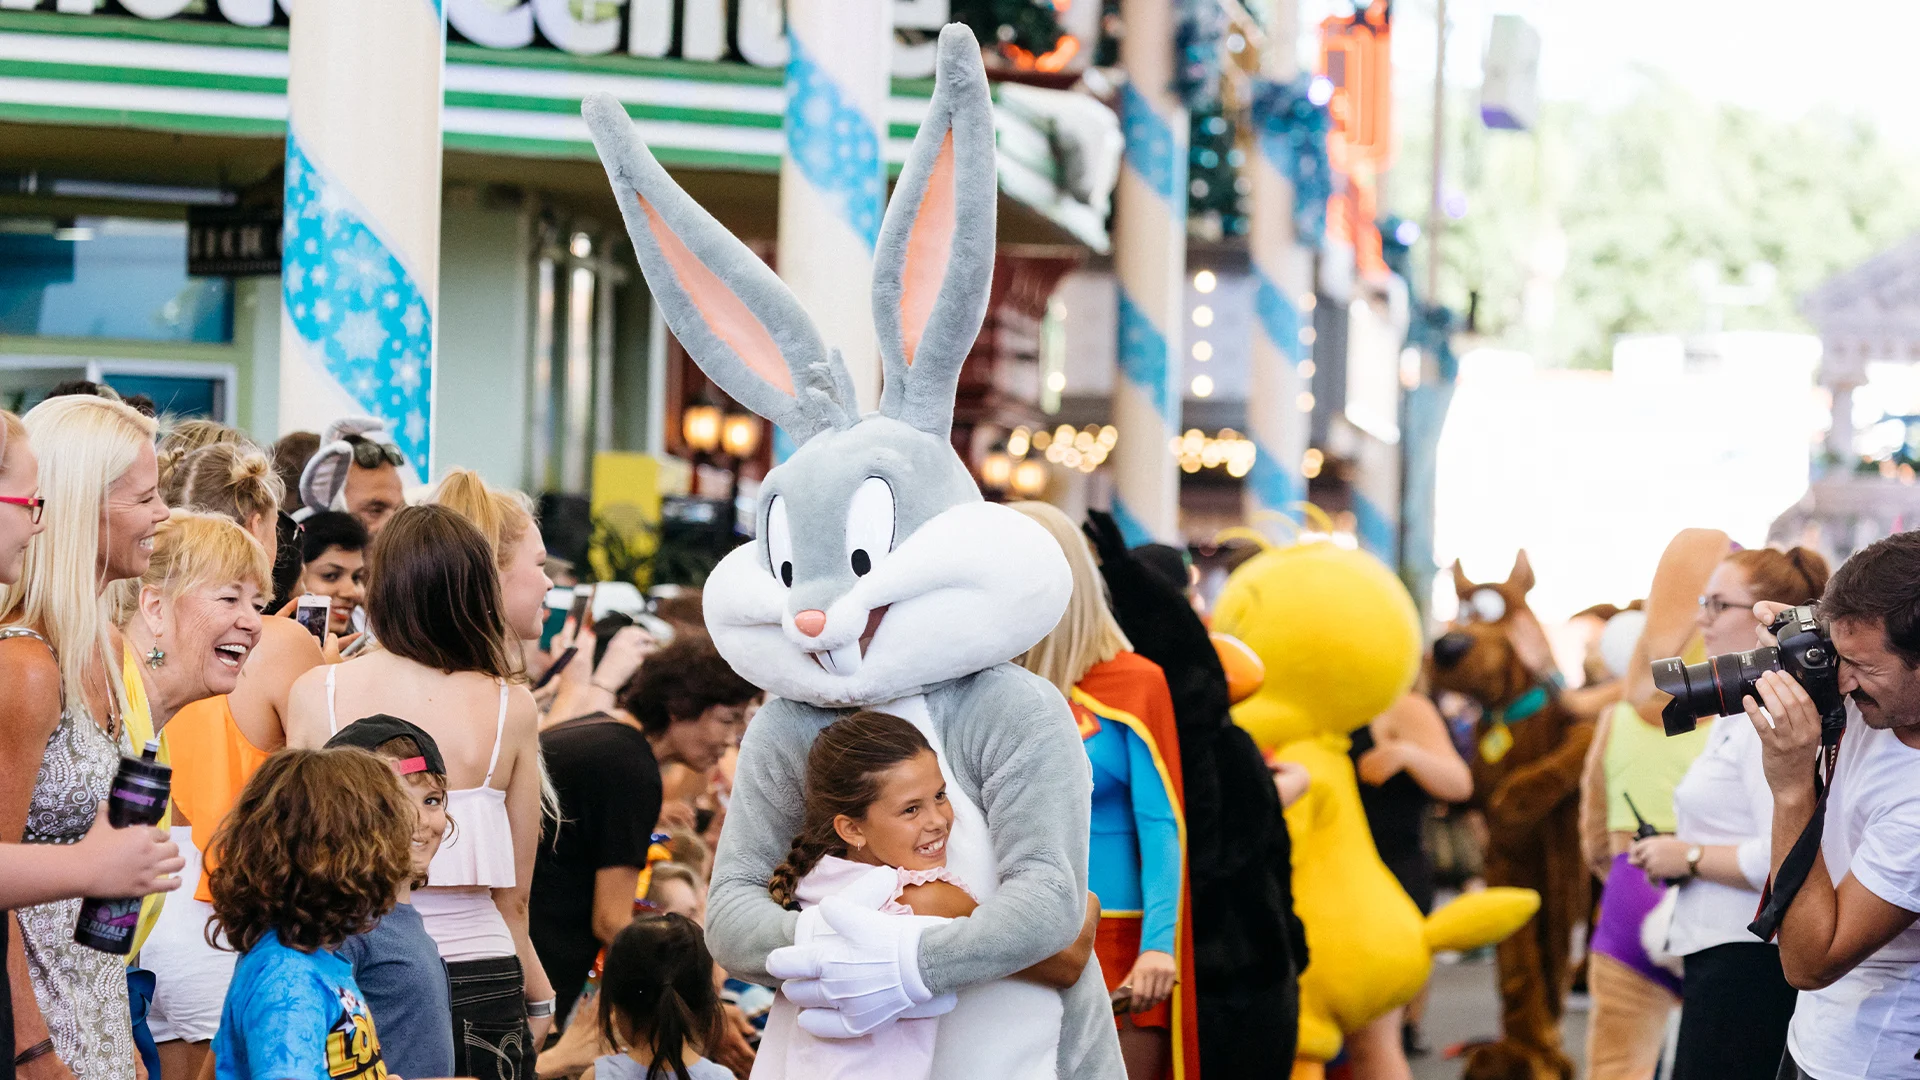 A smiling child joyfully embraces Bugs Bunny during the Star Parade on Main Street at Warner Bros. Movie World